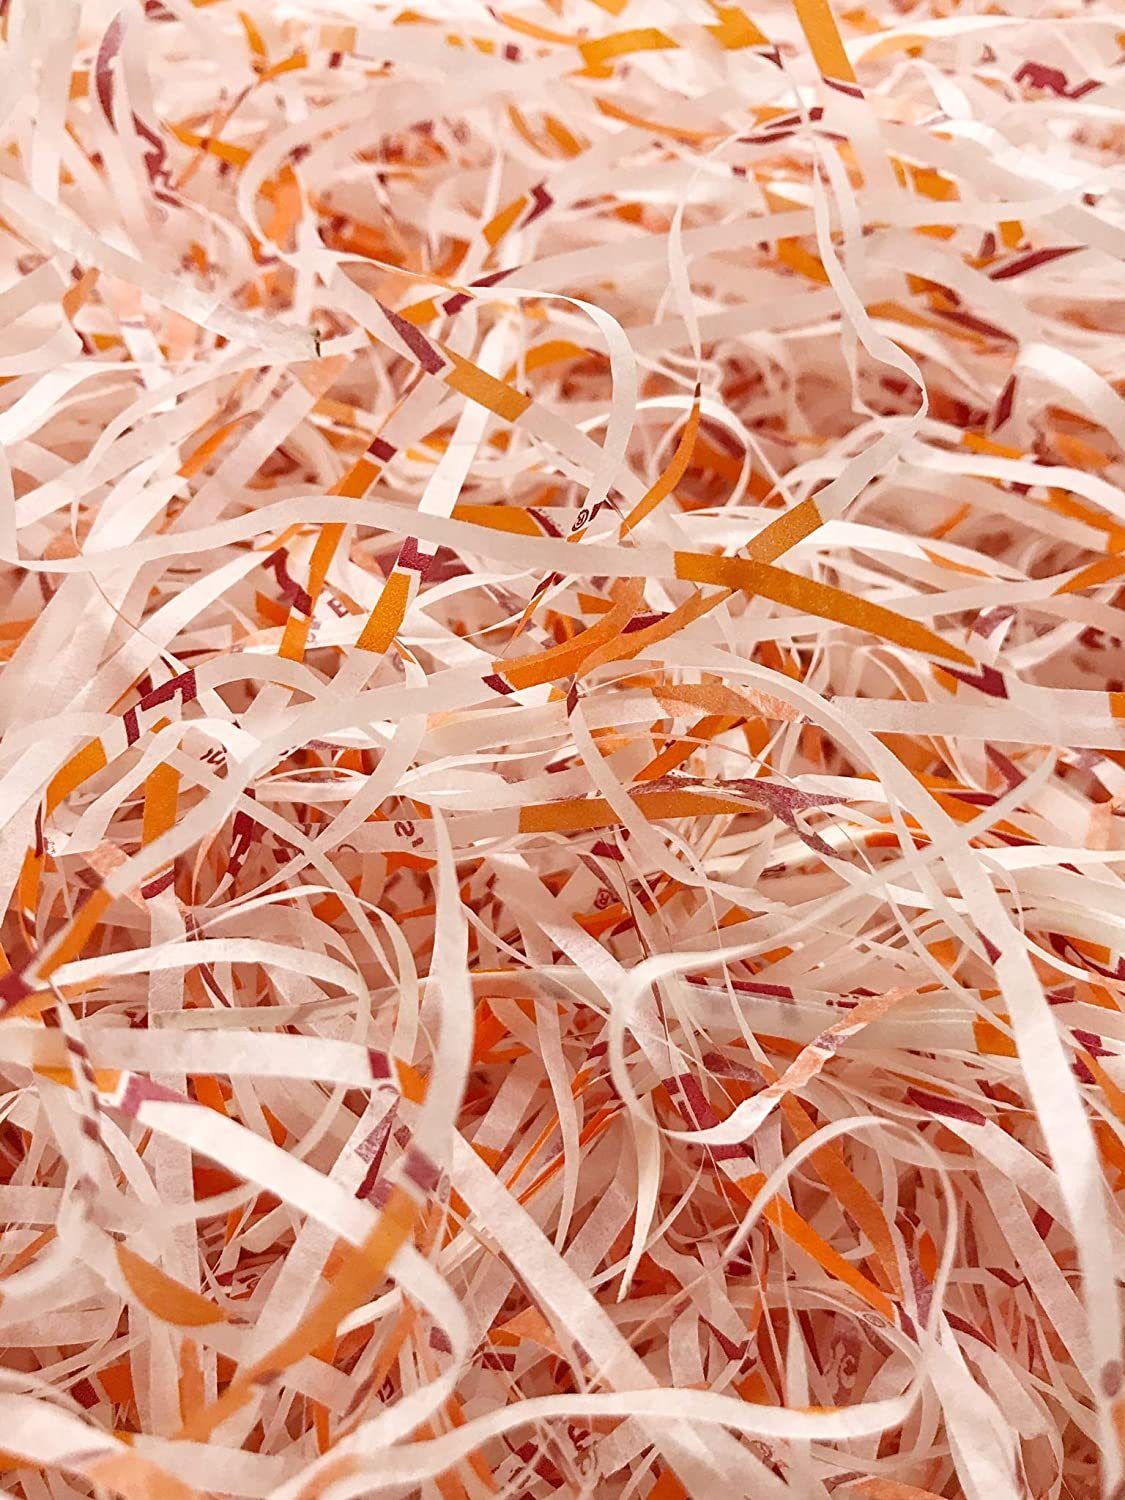 Paper Grass, Shredded Paper, Confetti Paper, Crinkle Paper Manufacturer and Supplier, Paper